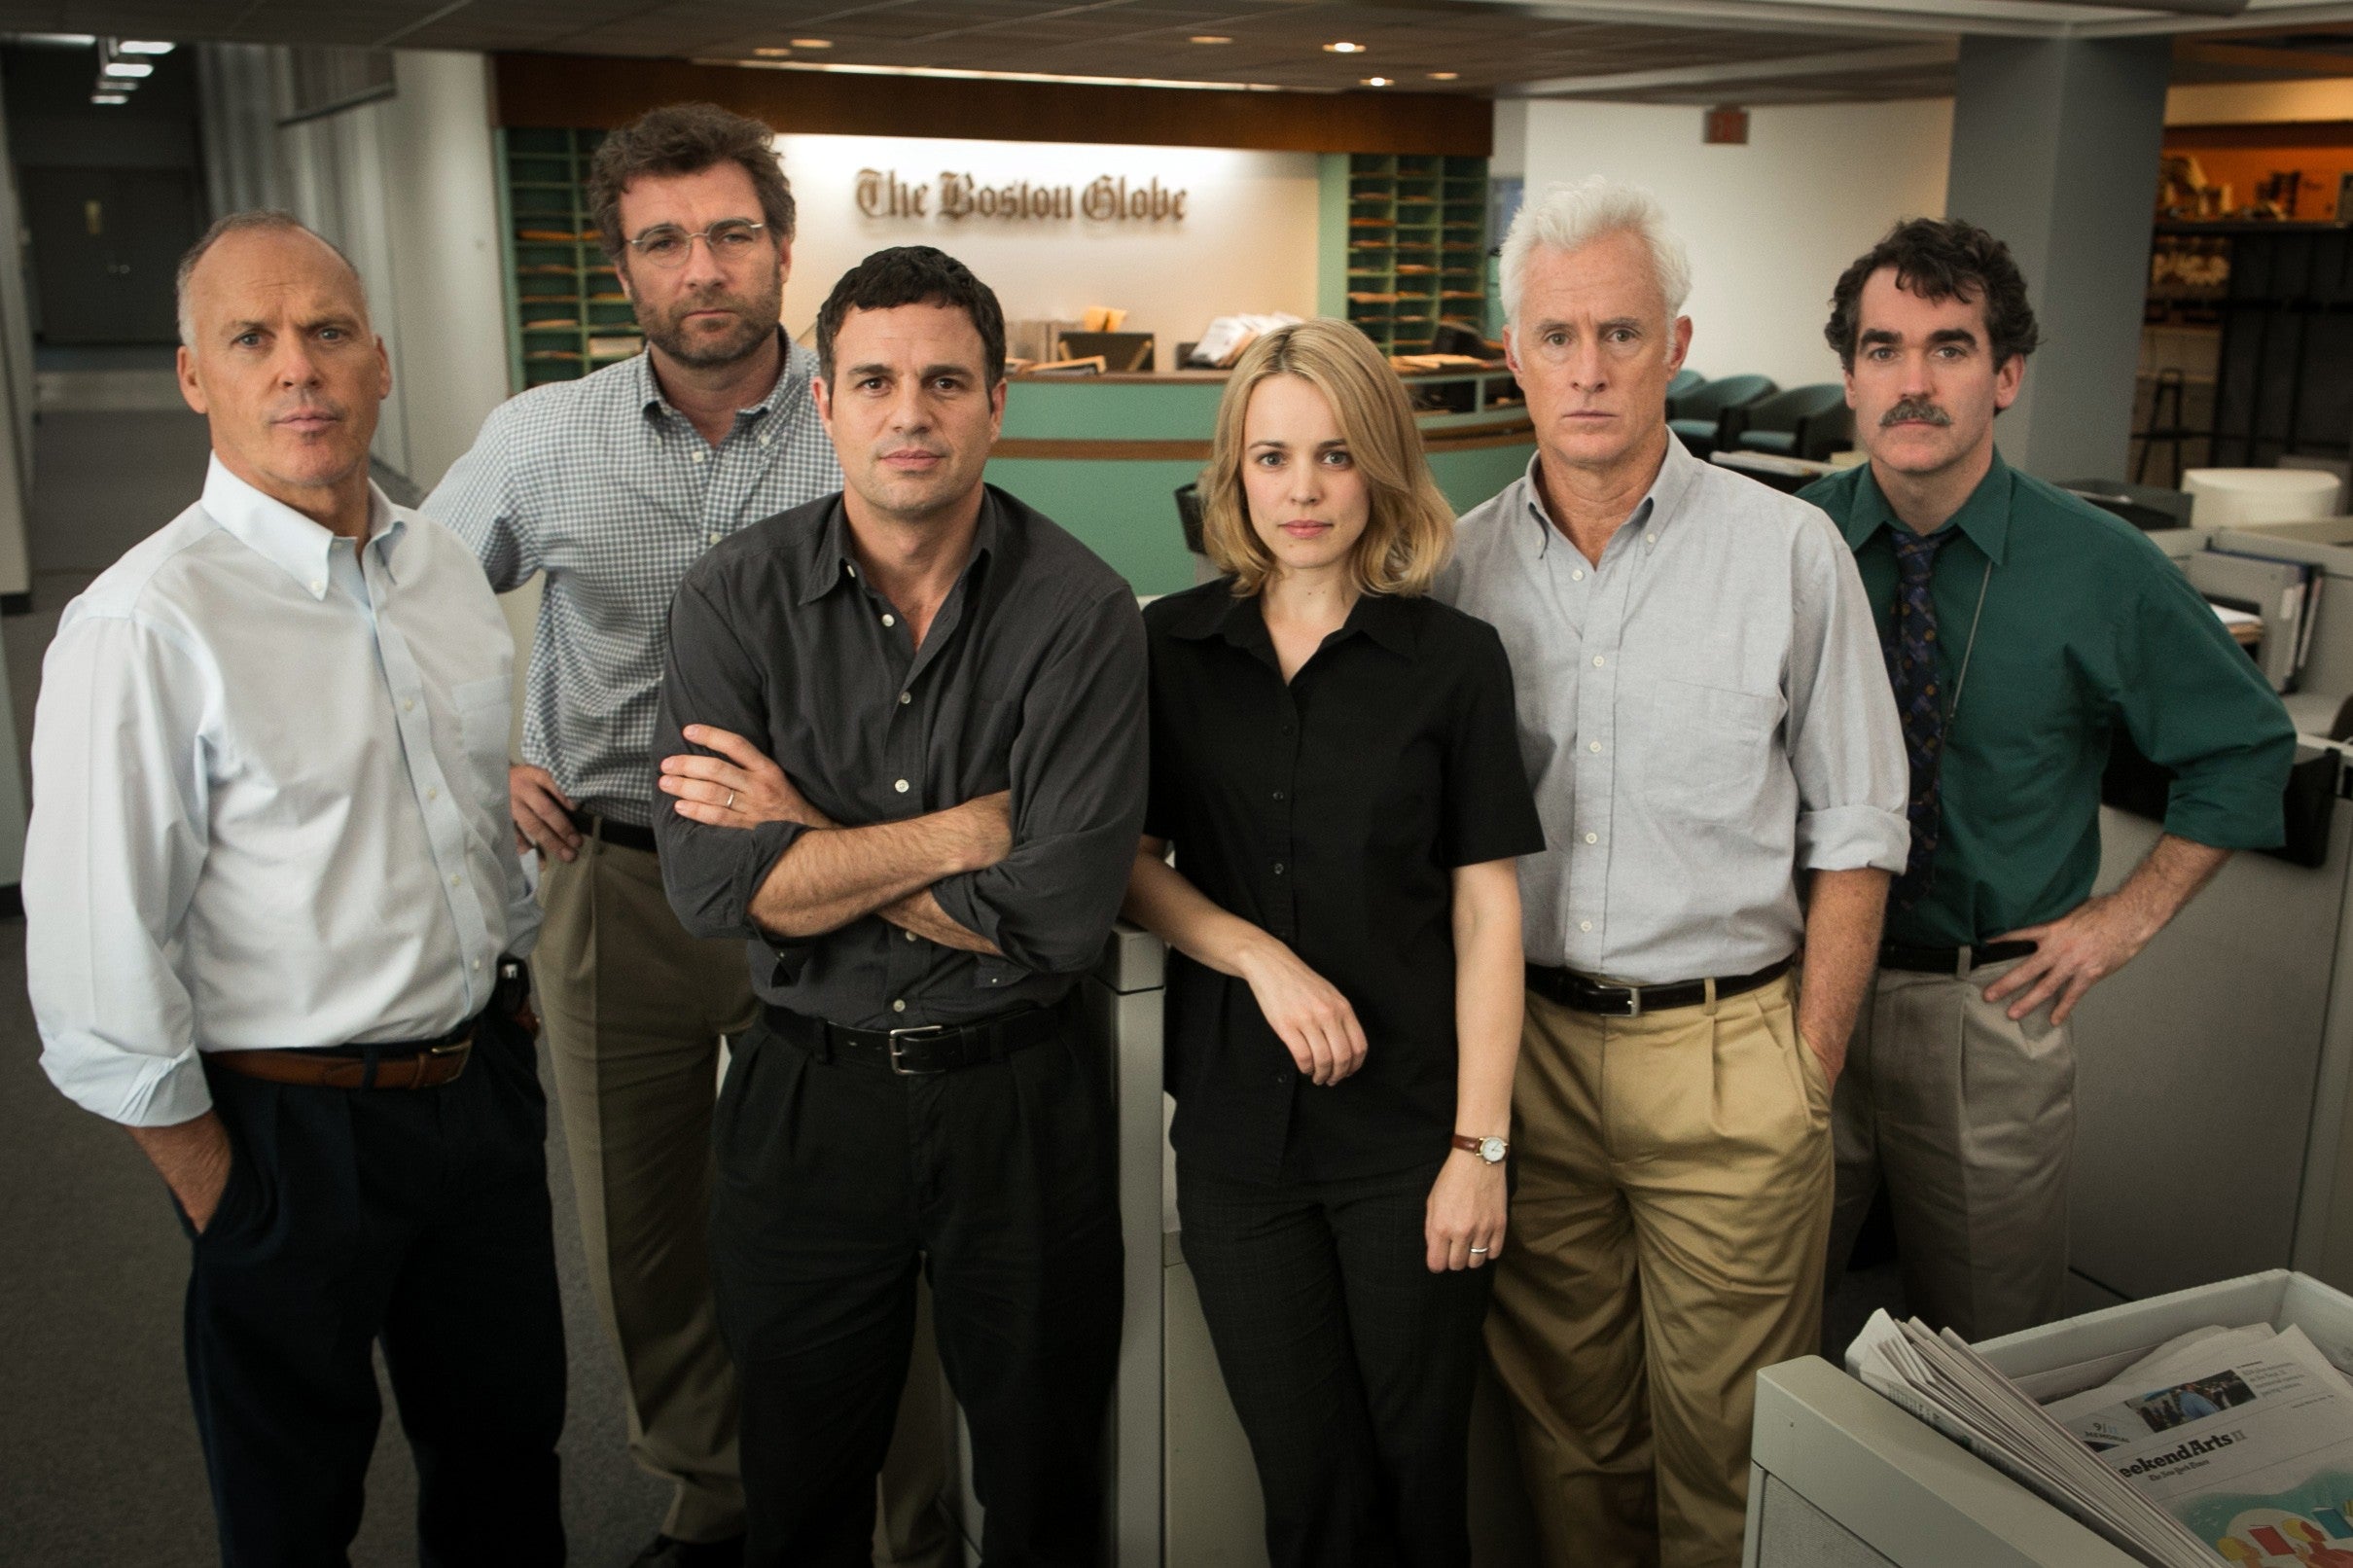 Spotlight won Best Picture and Best Original Screenplay at the Oscars ceremony on Sunday 28 February